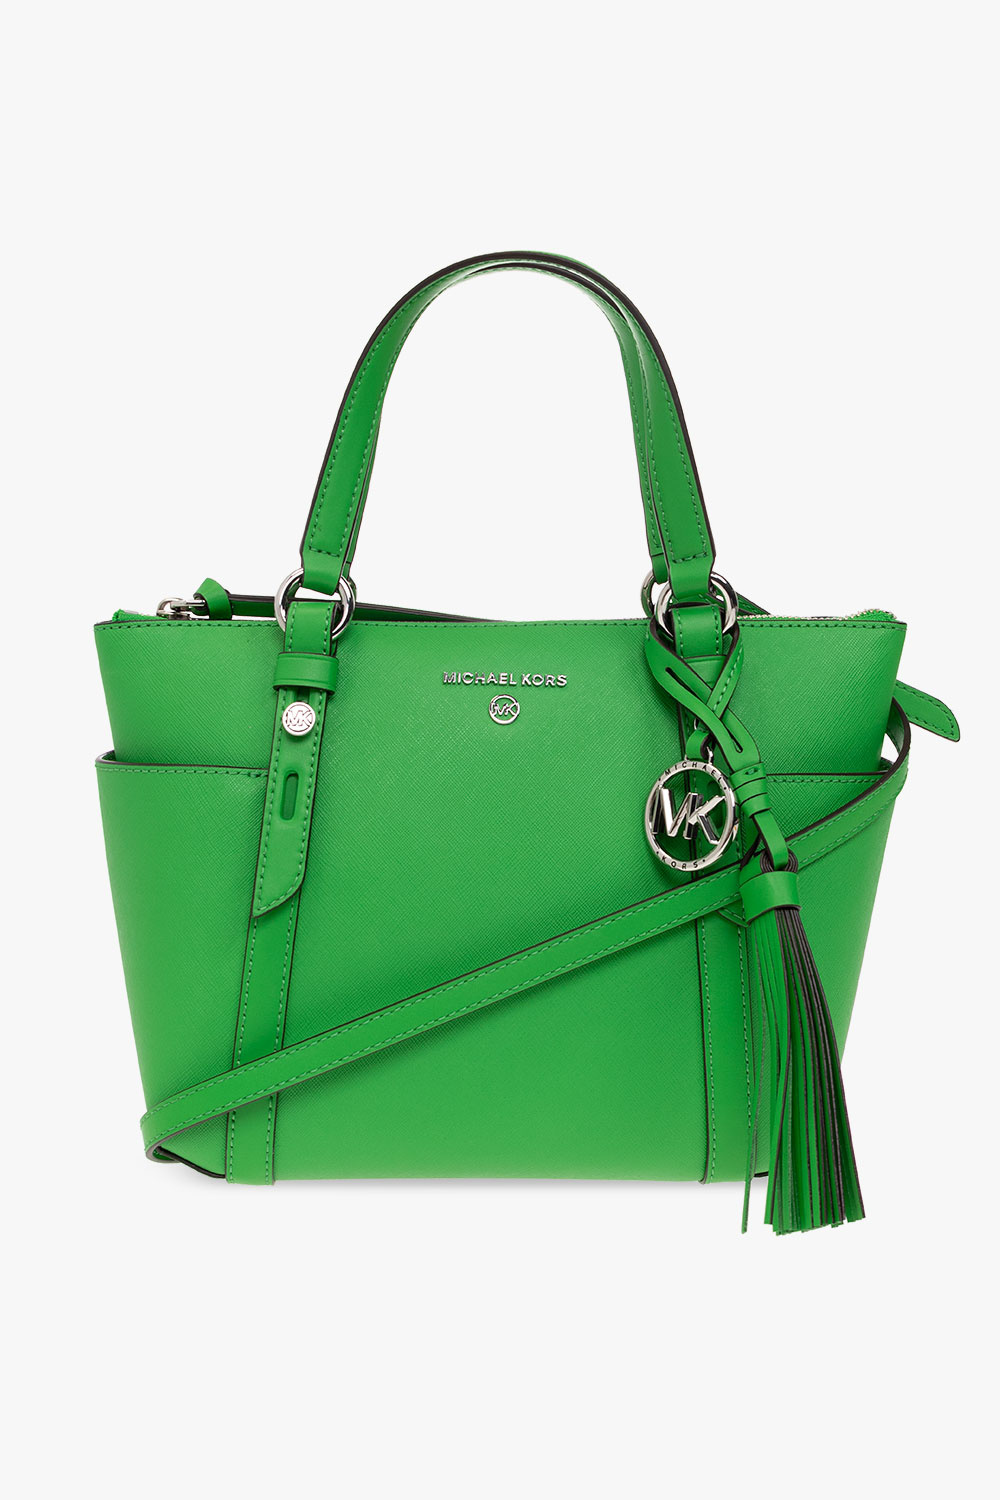 Michael Kors Sullivan Small Logo Top Zip Tote, Totes & Shoppers, Clothing  & Accessories